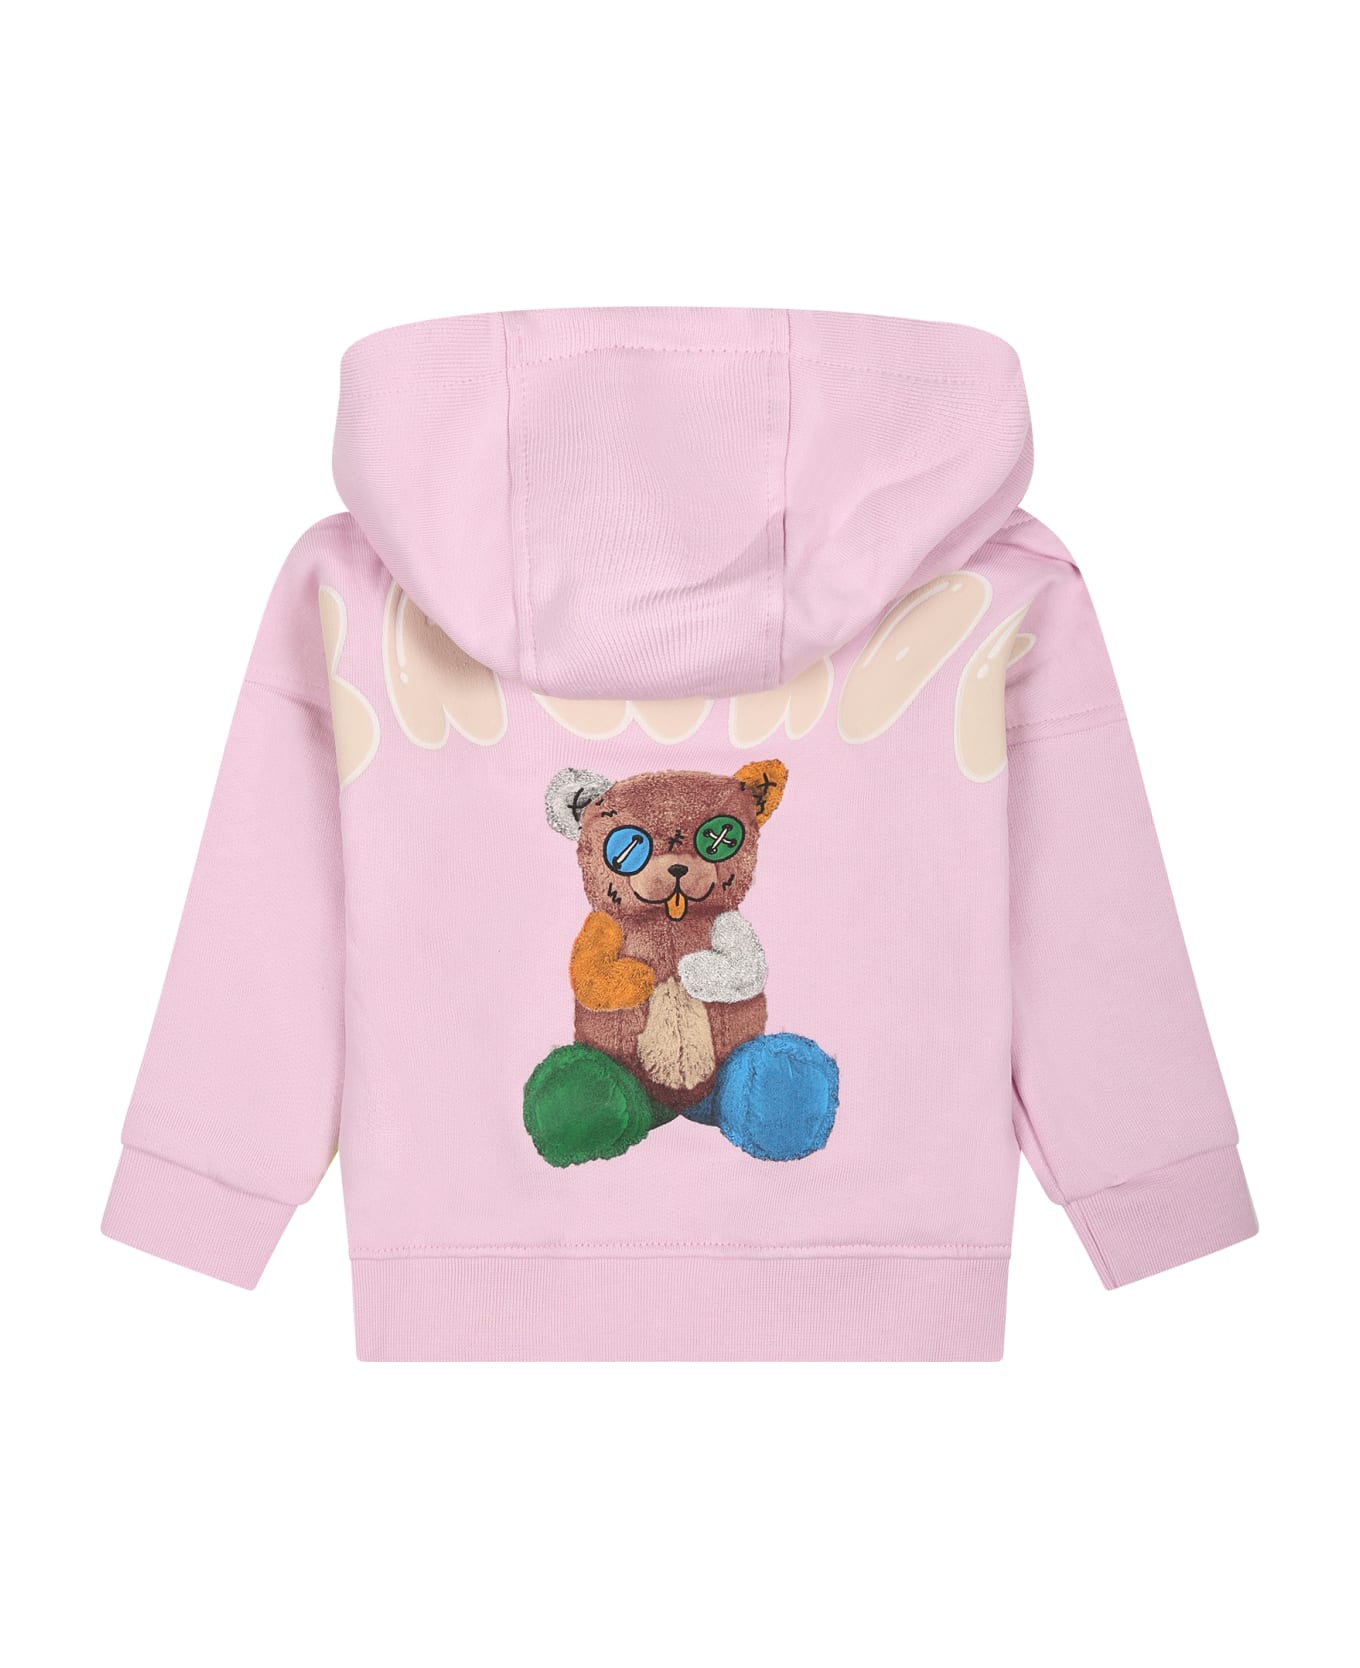 Barrow Pink Sweatshirt For Baby Girl With Logo And Bear - Pink